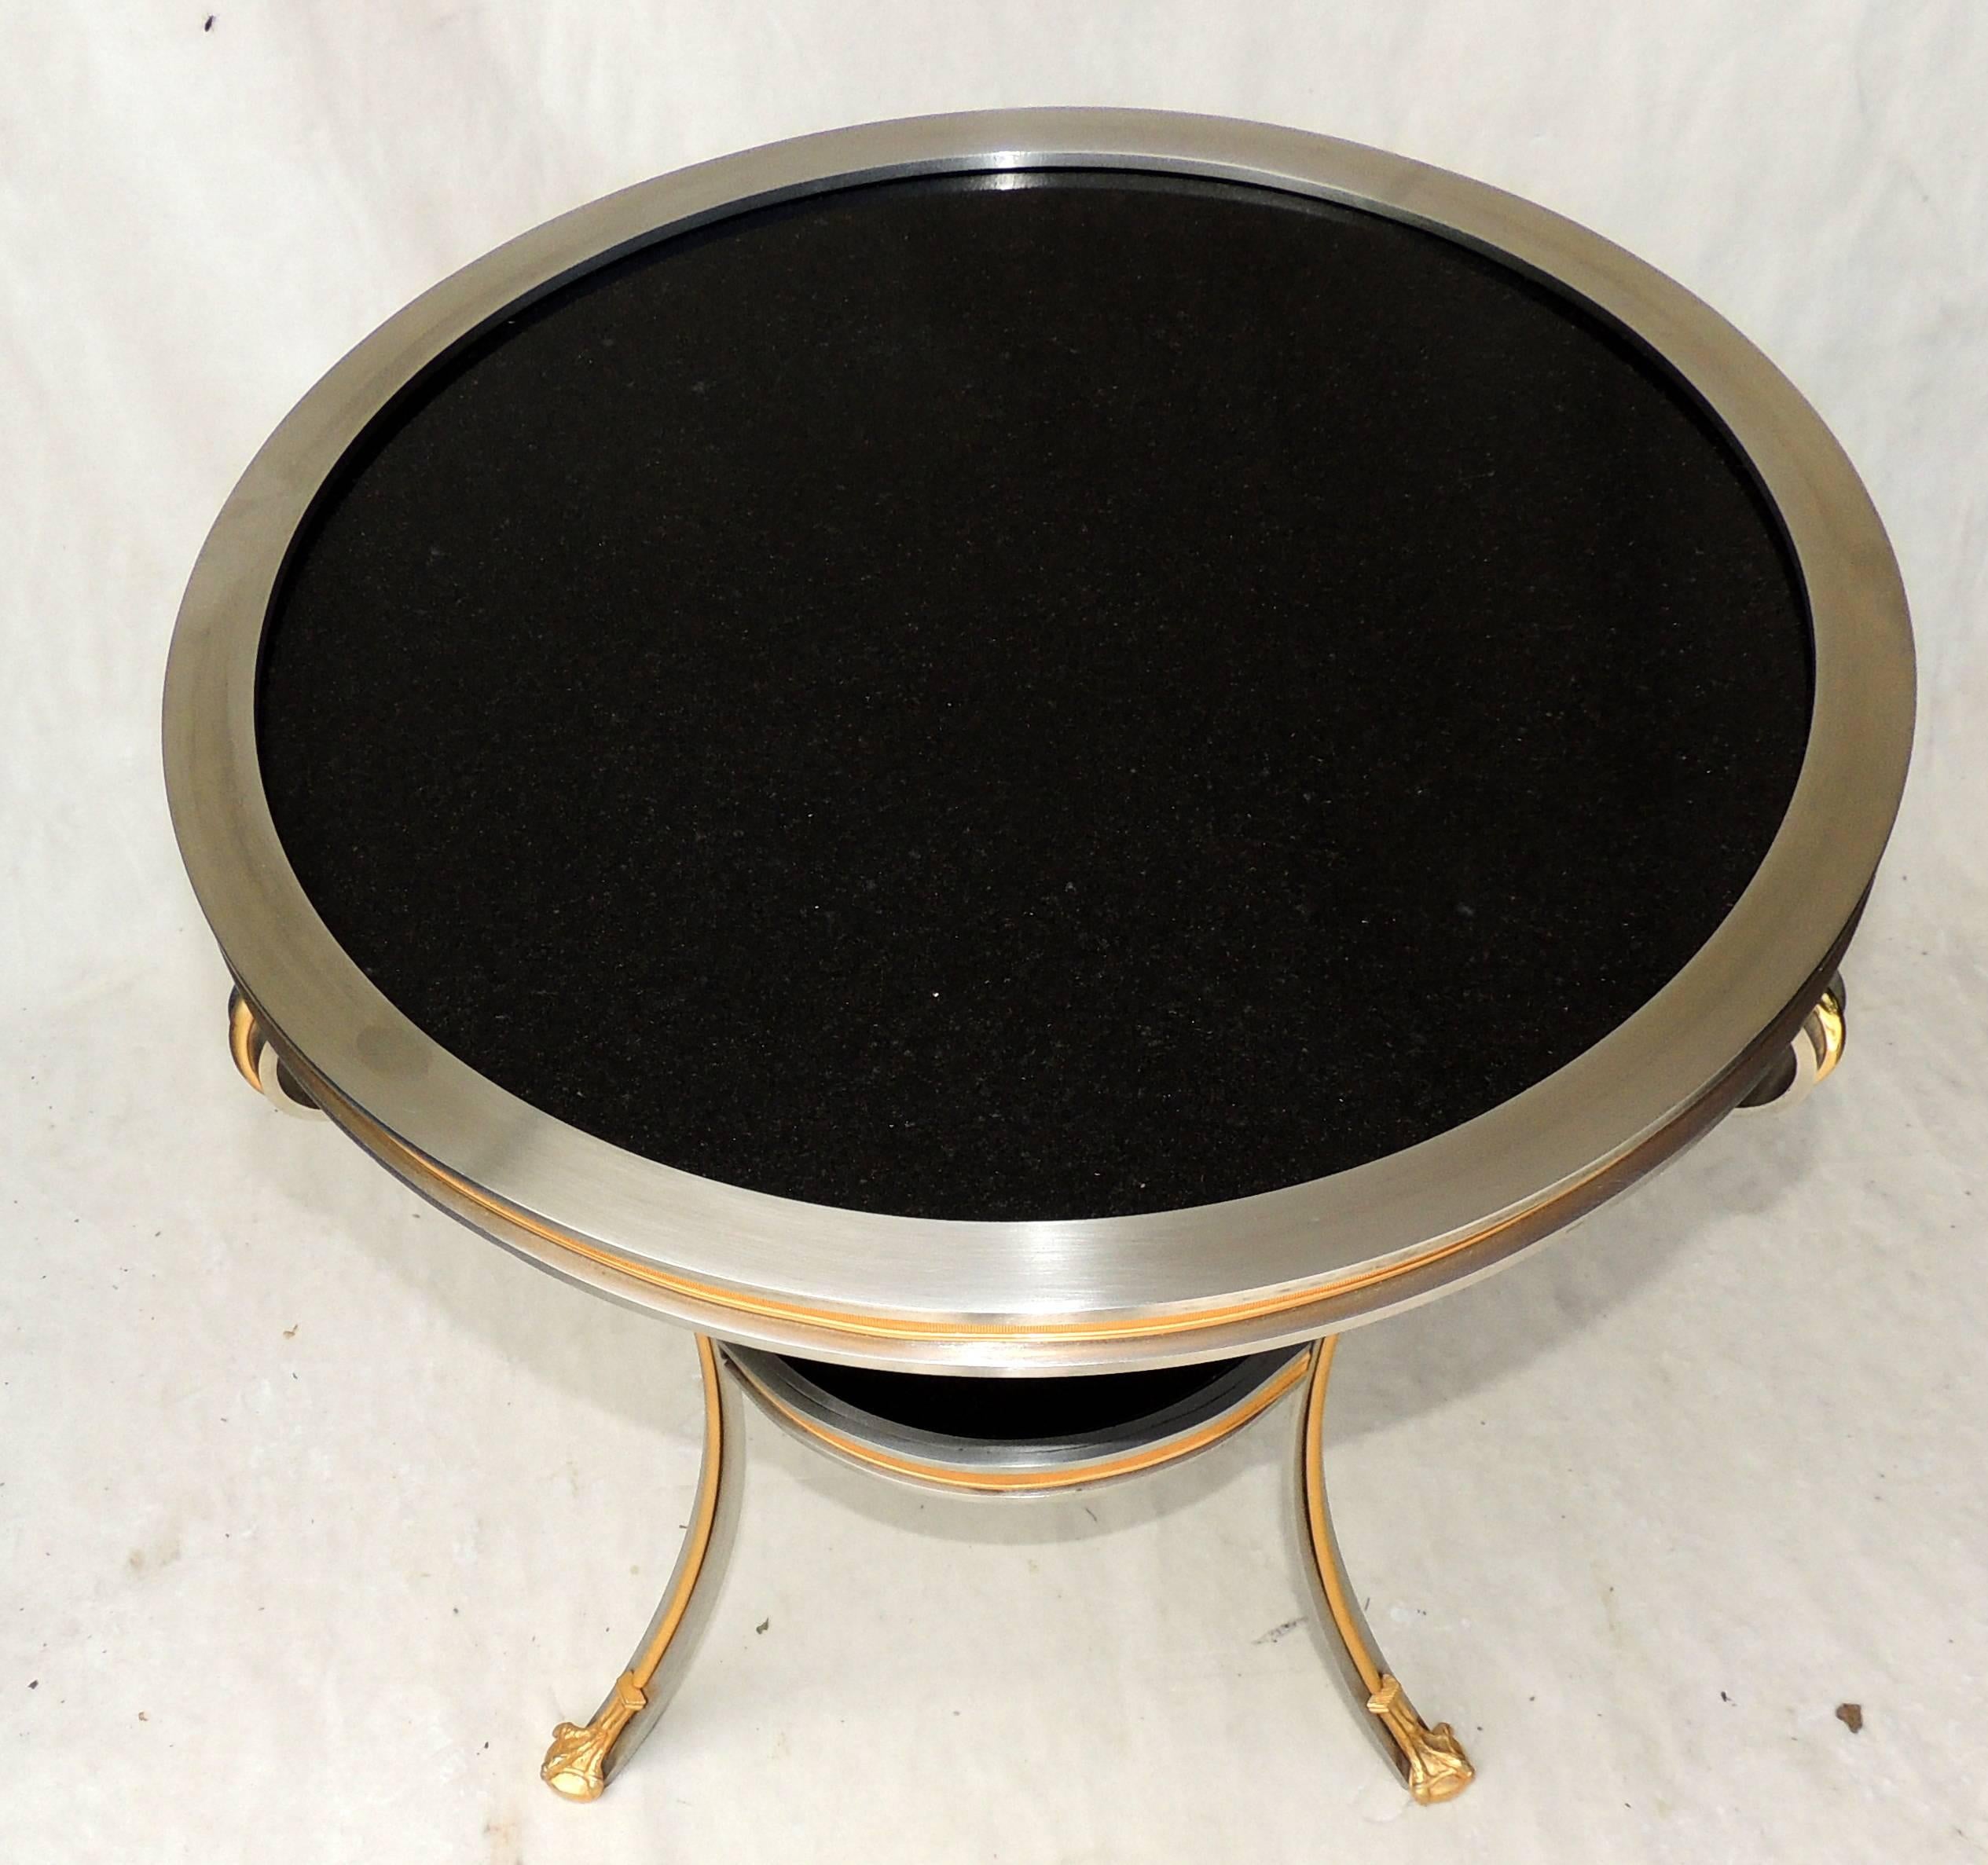 A Mid-Century Modern transition brushed silver steel bronze inset ormolu-mounted gueridon table with black granite stone by Mansfield Manor.